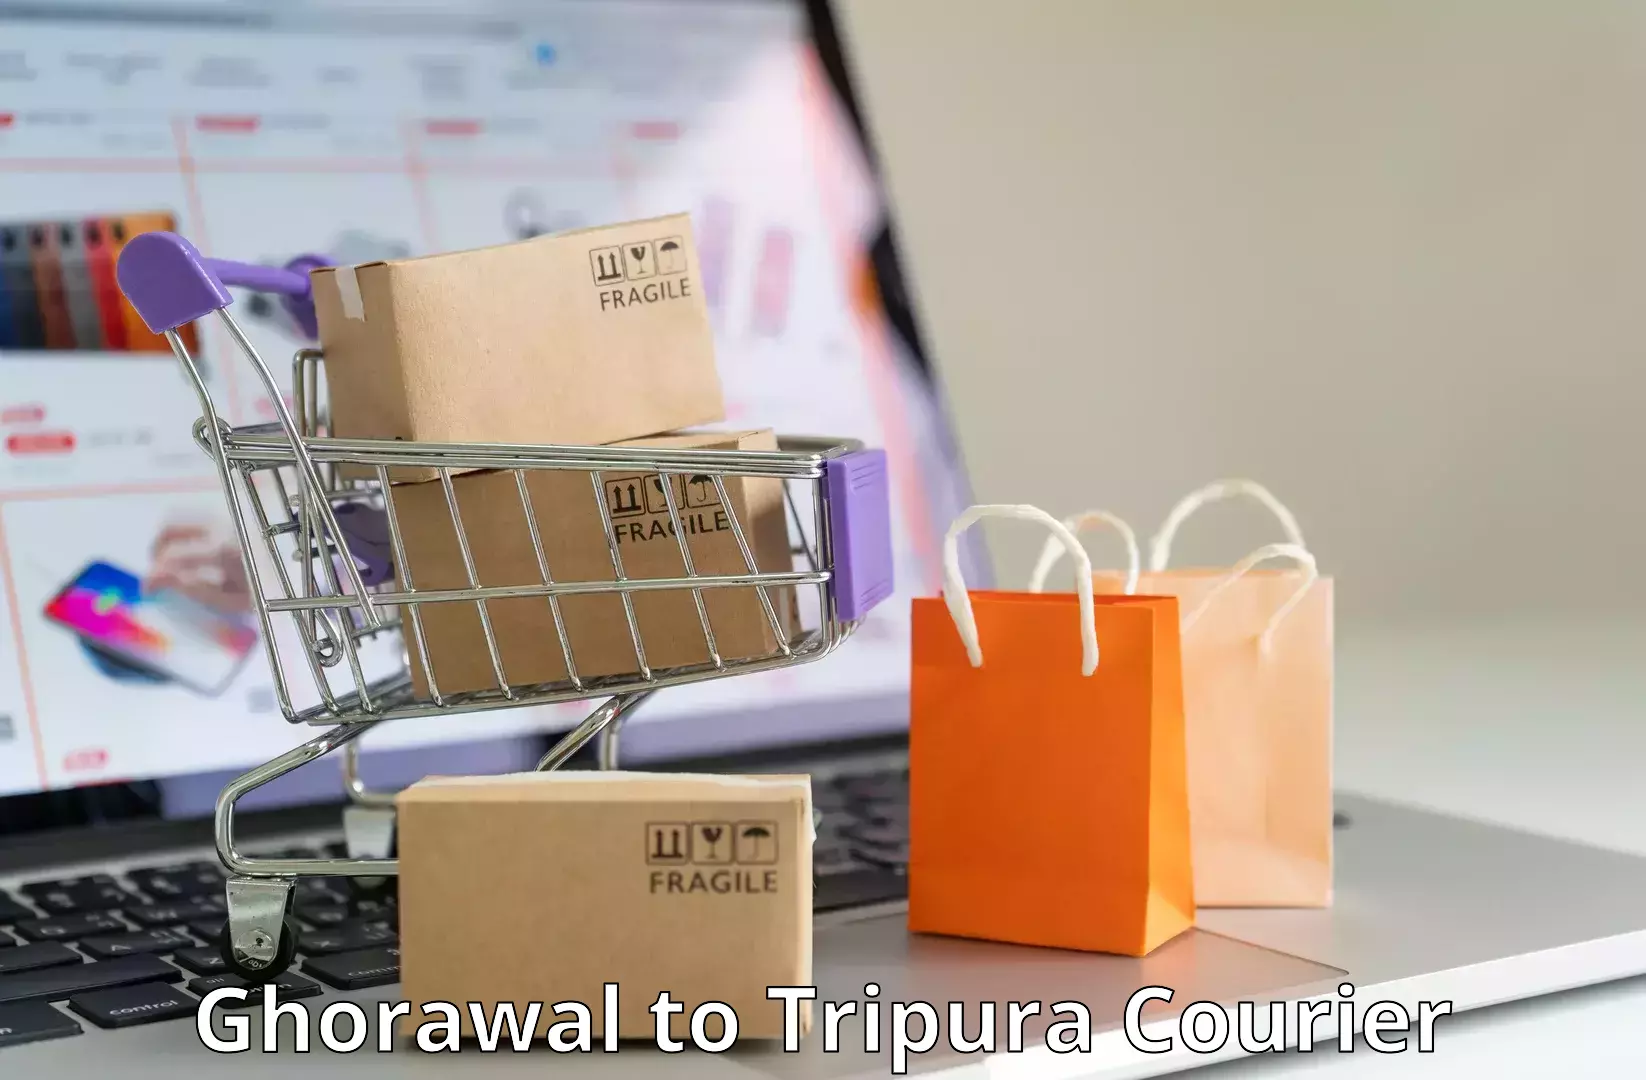 Enhanced tracking features Ghorawal to Udaipur Tripura